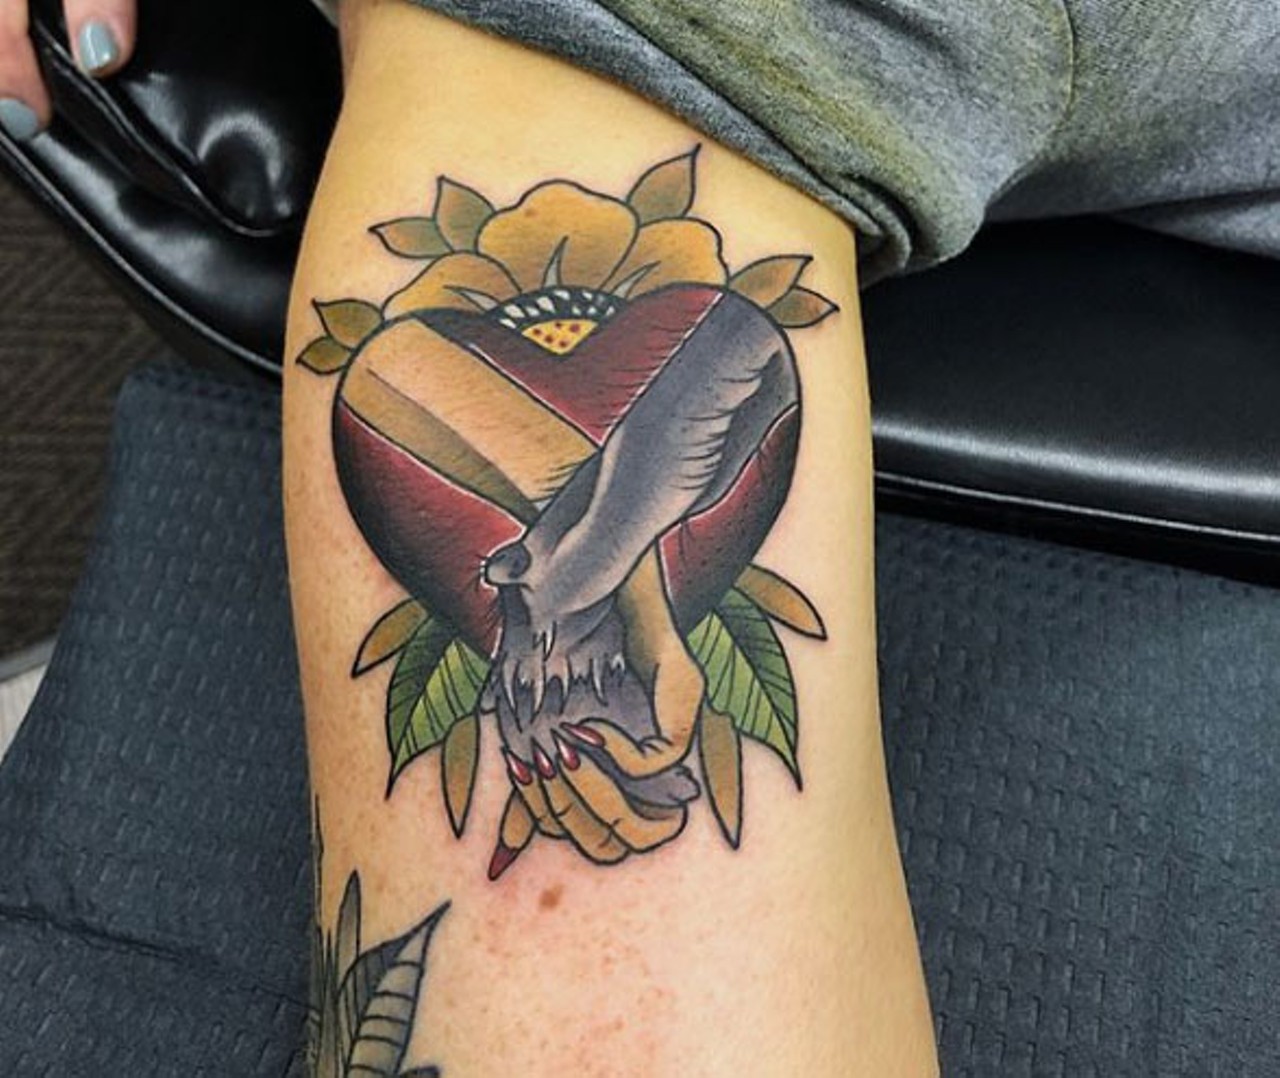 18 Cleveland Tattoo Shops You Should Already Be Following on Instagram   Cleveland  Cleveland Scene